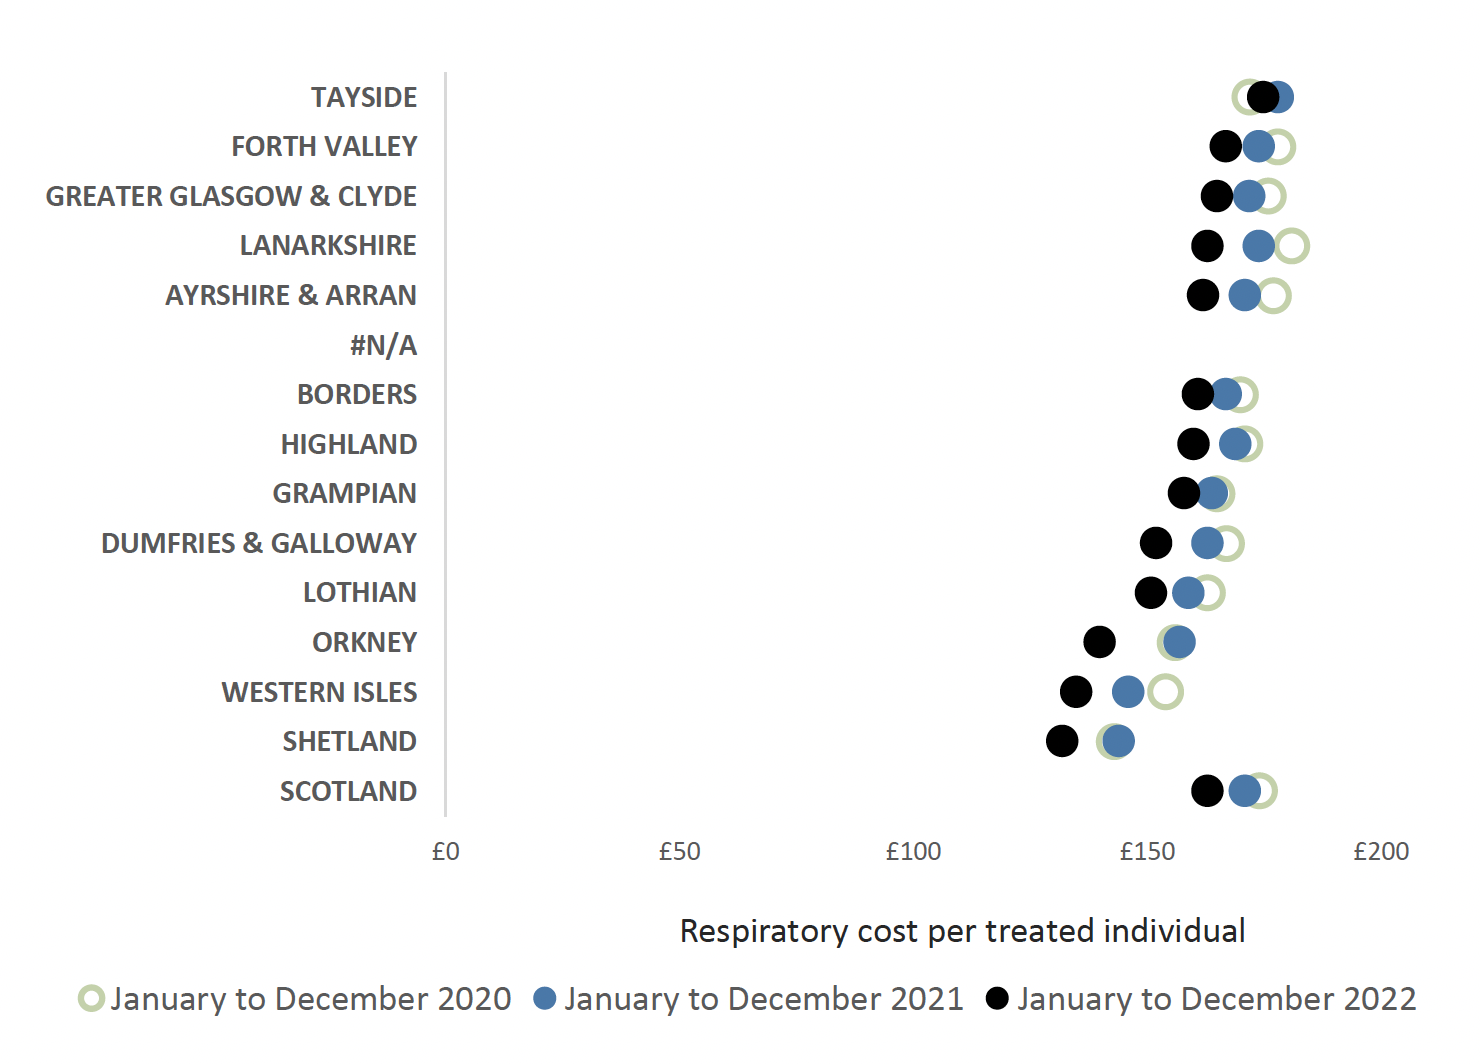 Chart showing variance in respiratory costs per treated patient across all health boards and Scotland from 2020 to 2022. Overall Scotland trend is decreasing